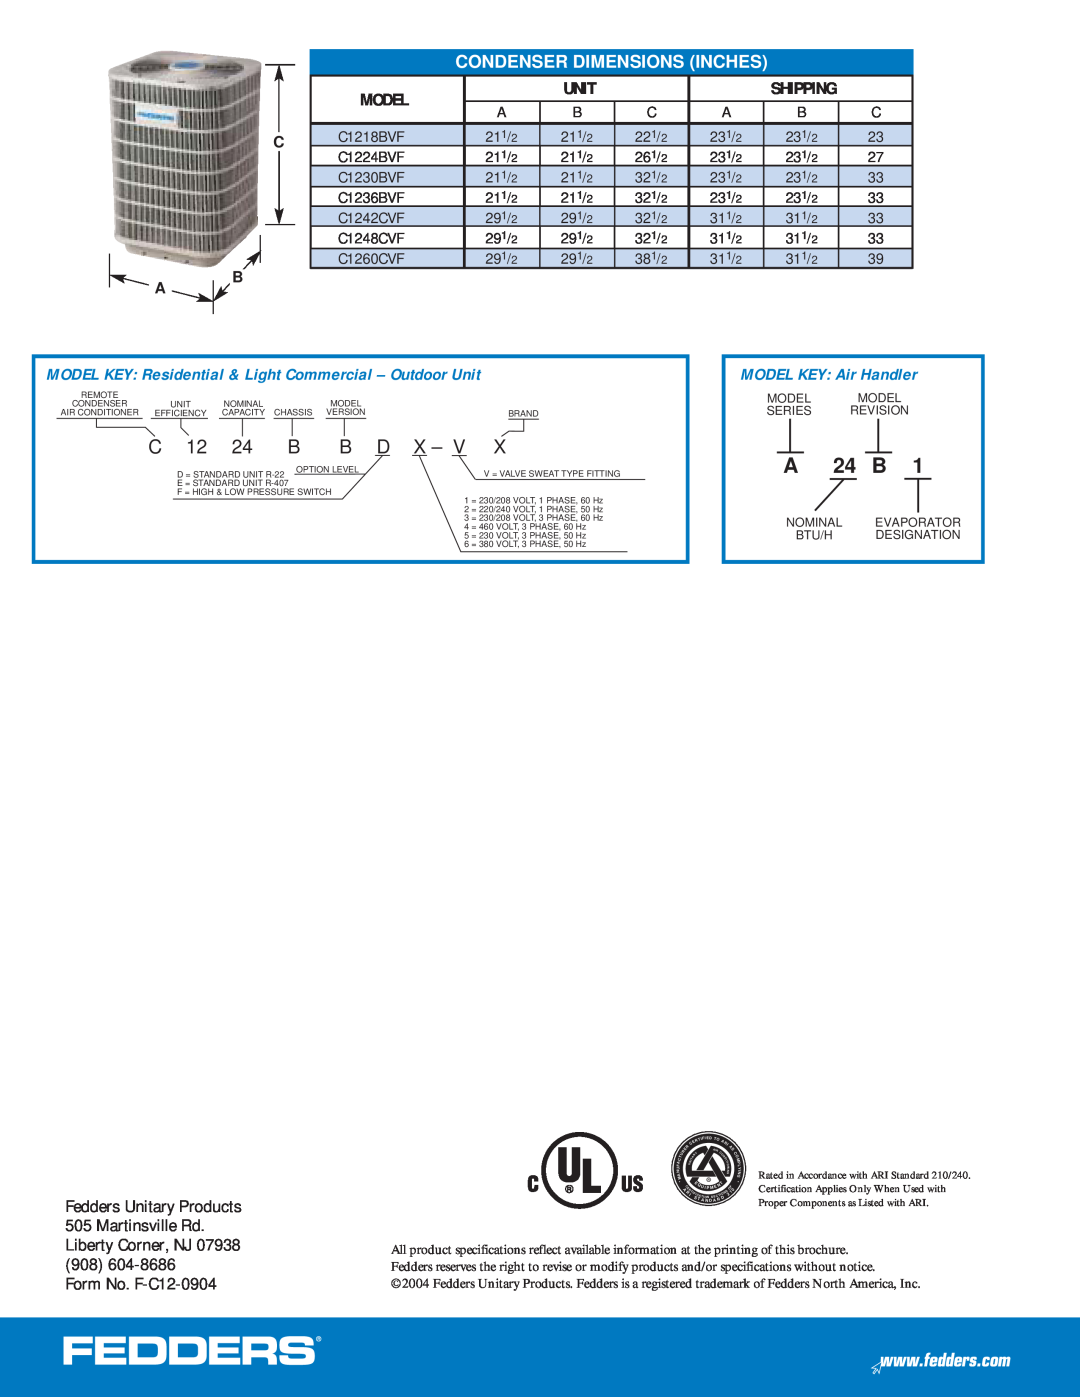 Fedders C12 Condenser Dimensions Inches, MODEL KEY Air Handler, Fedders Unitary Products 505 Martinsville Rd, Model 